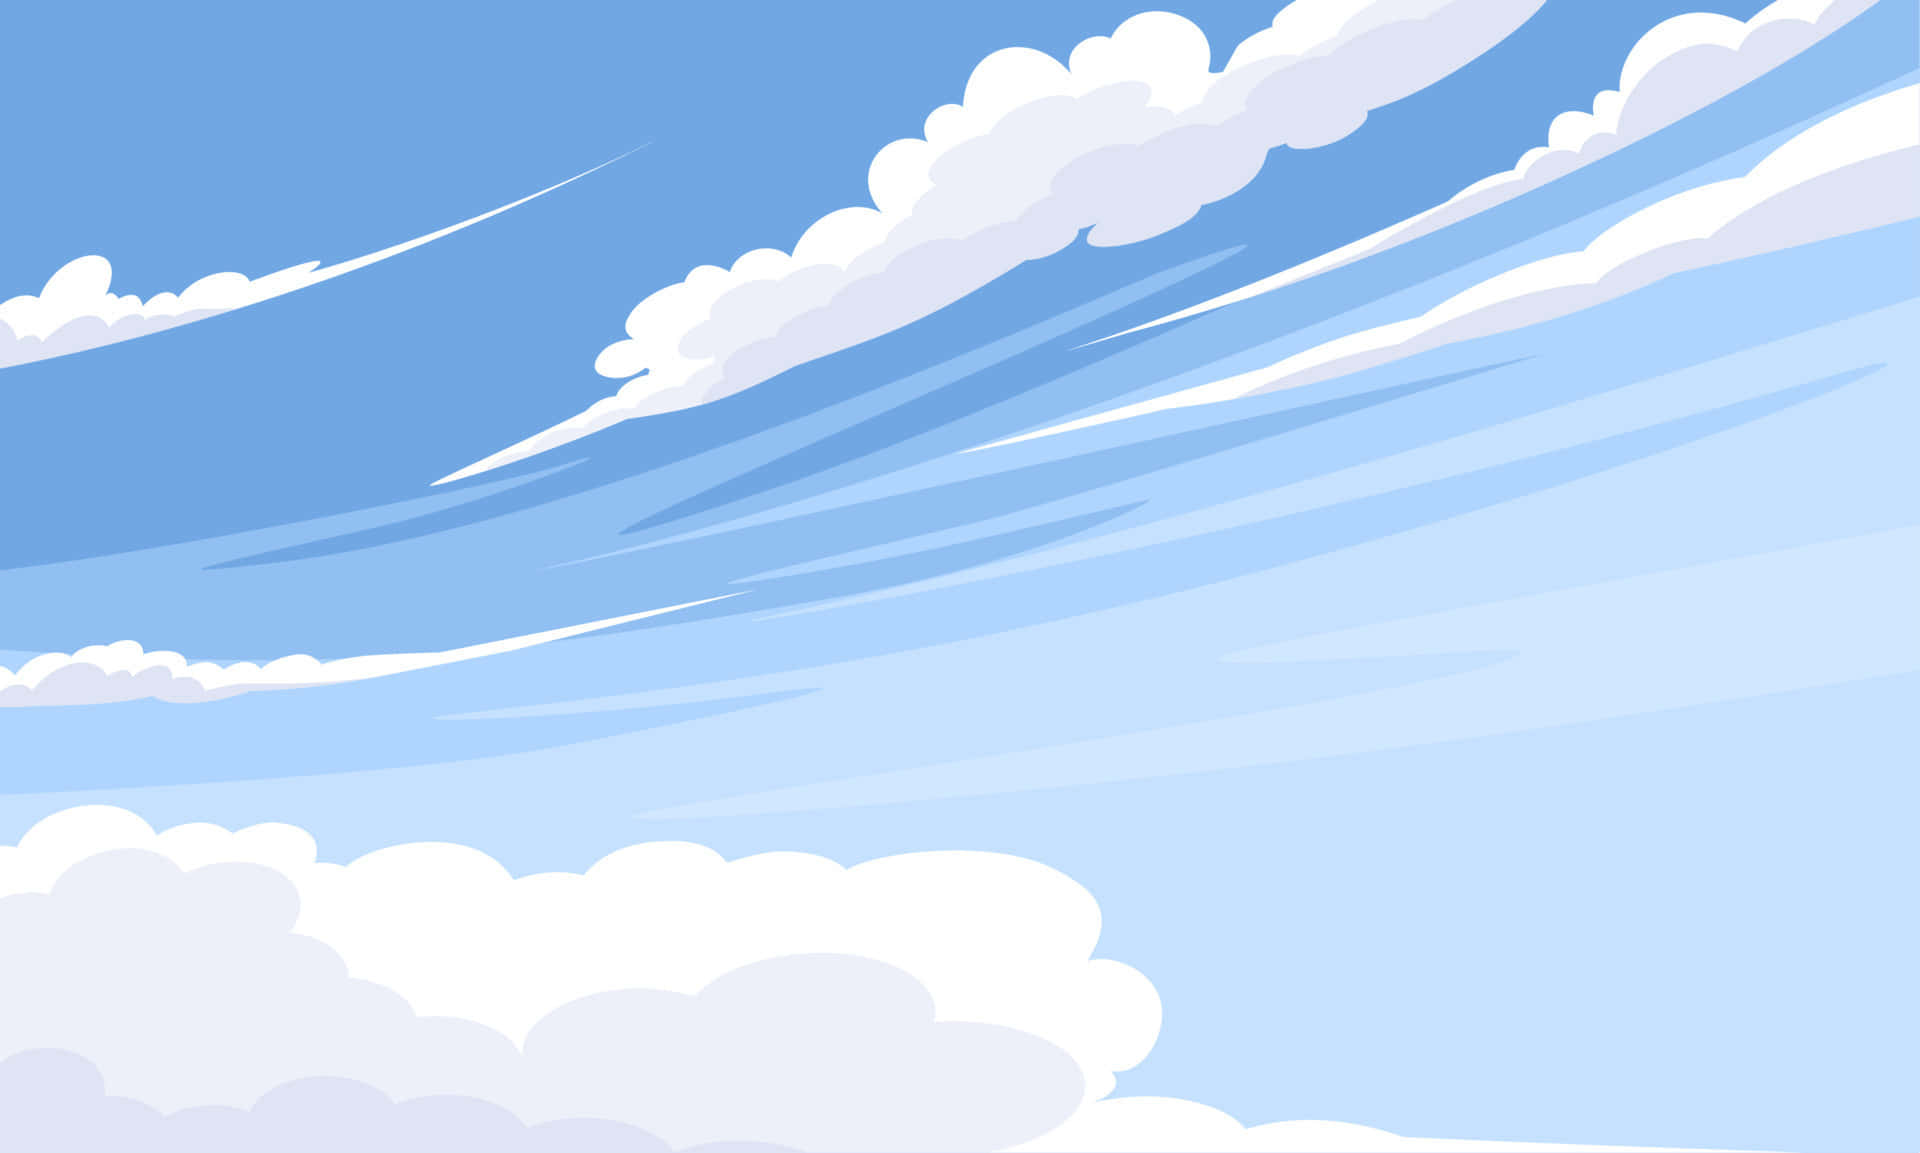 A Blue Sky With White Clouds Wallpaper